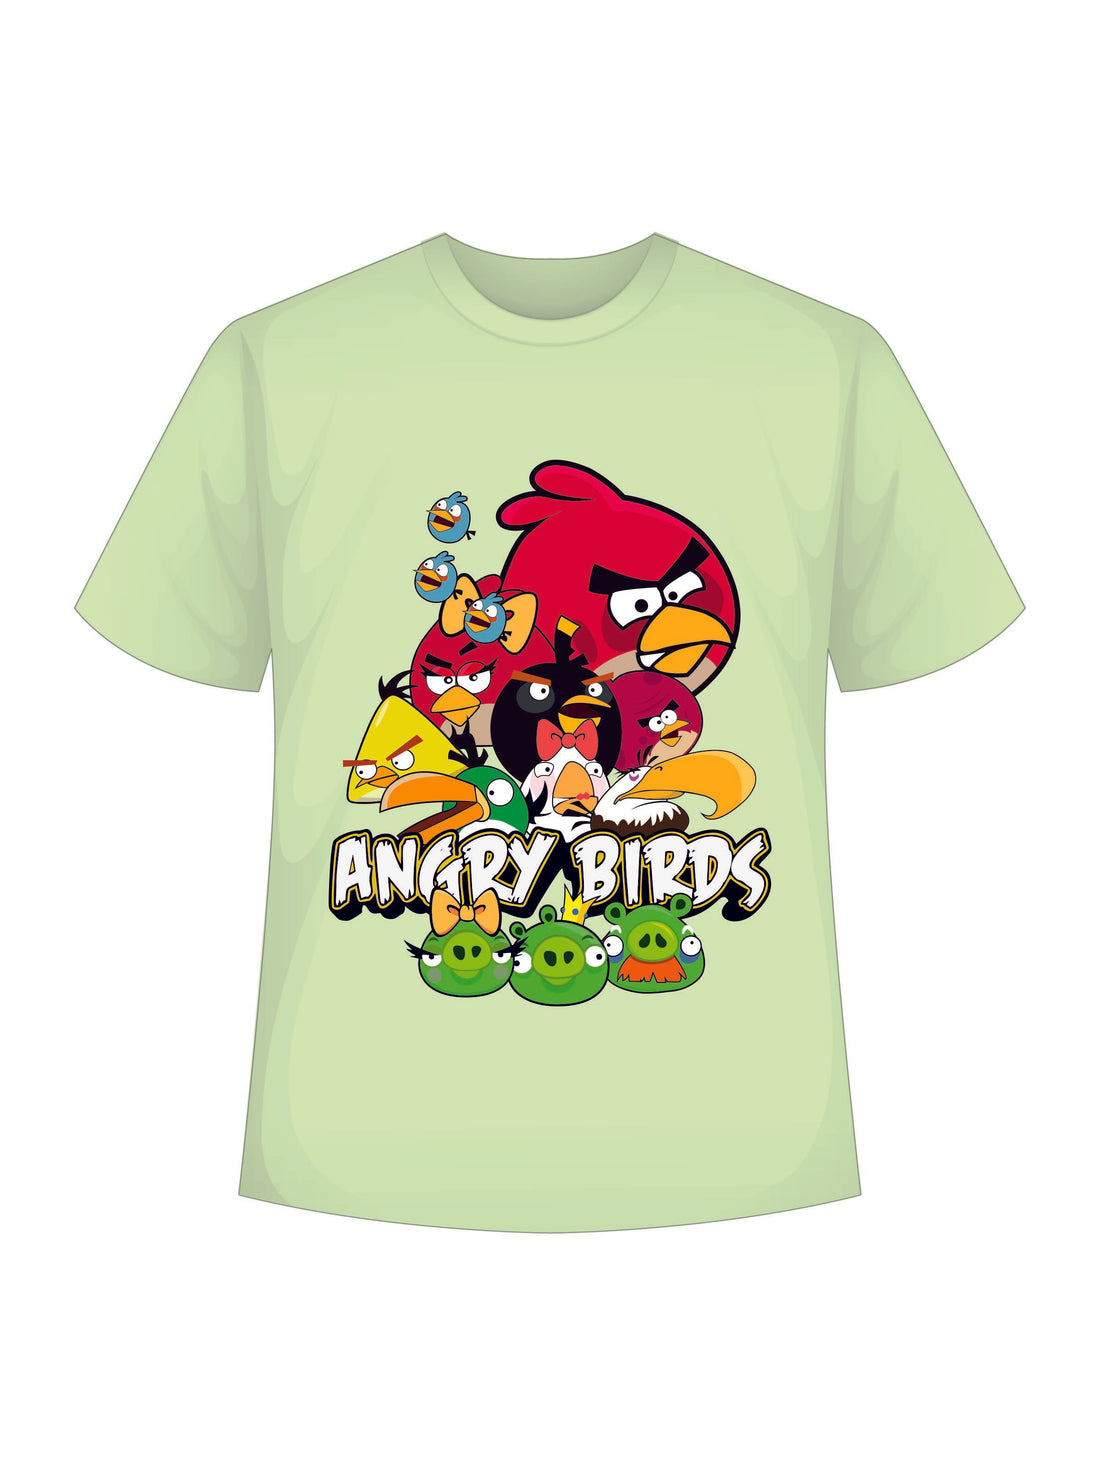 Angry Bird Army - Regular  Tee For Men and Women